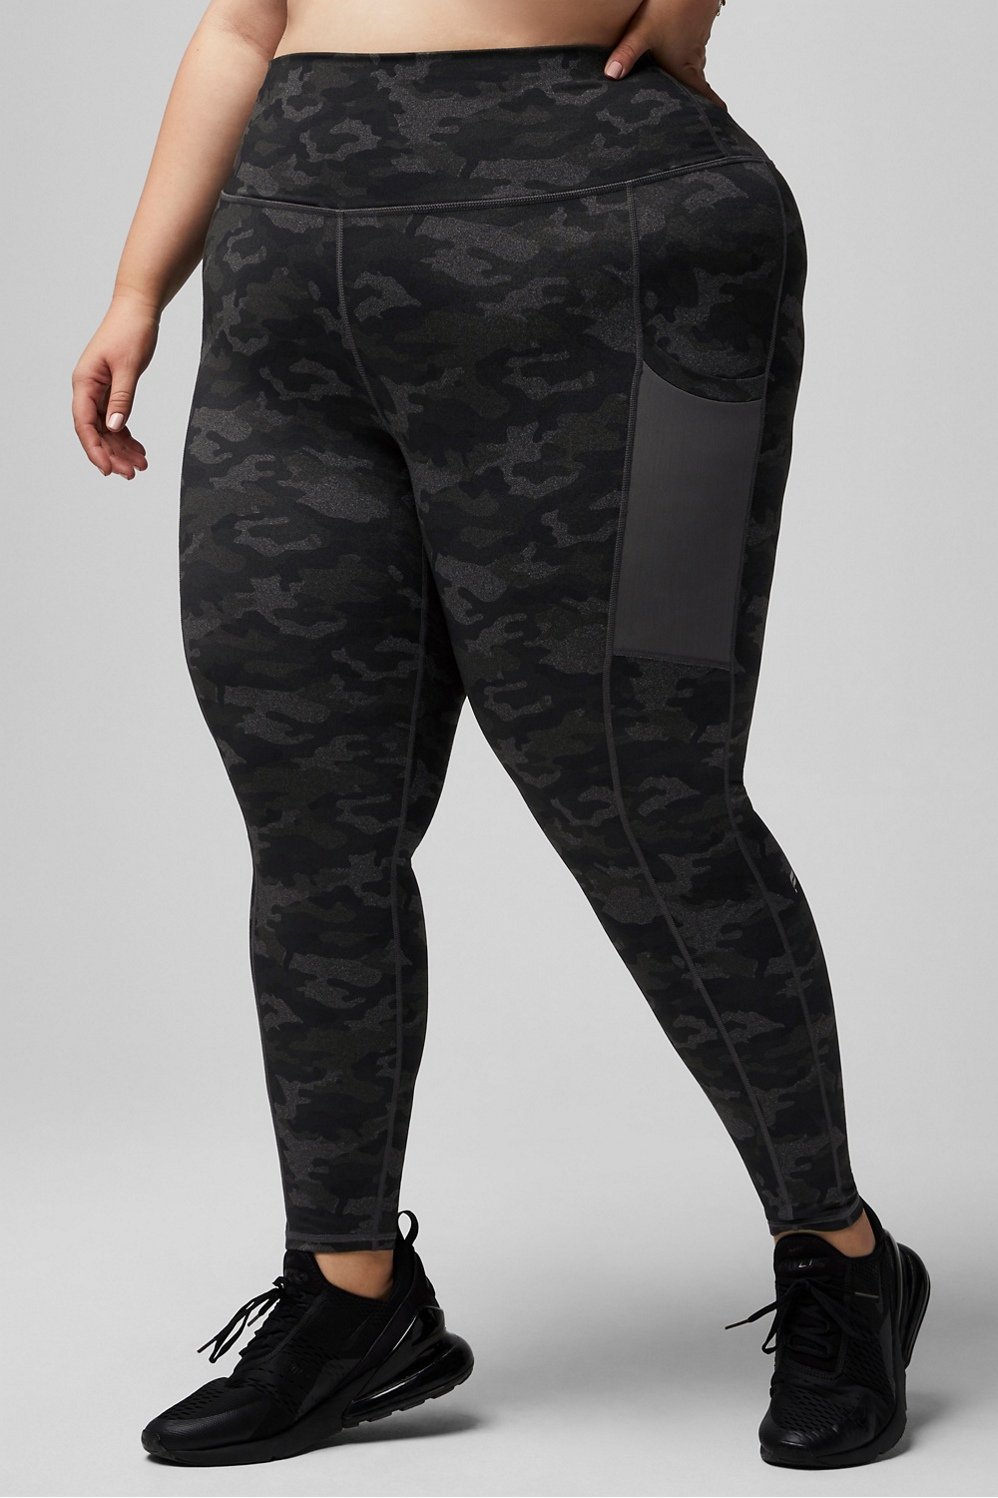 Wild Fable High Waist Grey Camo Leggings for Women – Rainy Day Deliveries